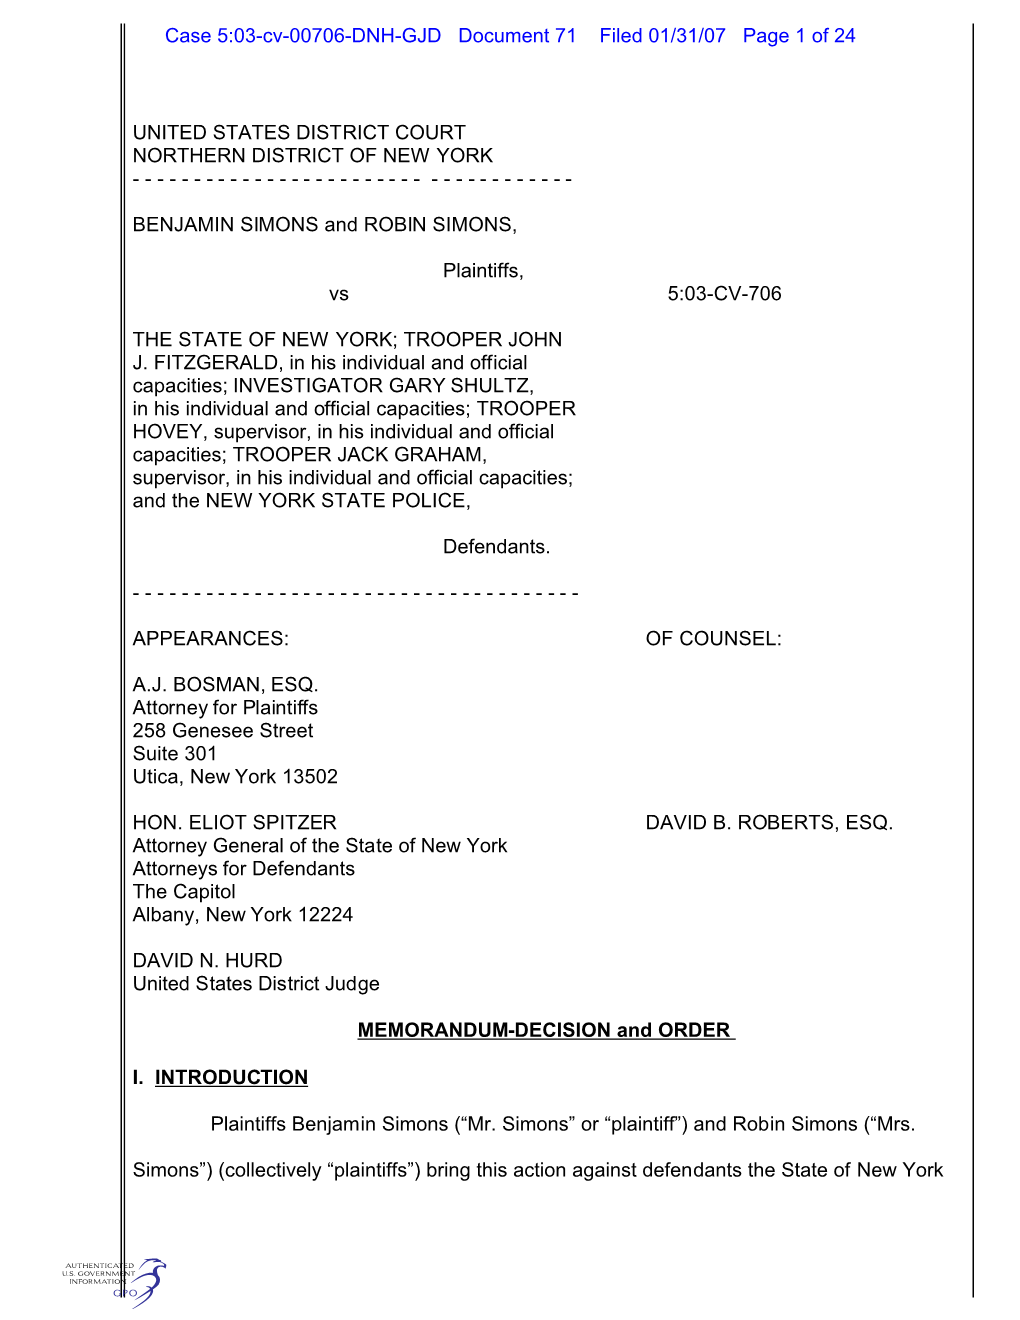 Case 5:03-Cv-00706-DNH-GJD Document 71 Filed 01/31/07 Page 1 of 24